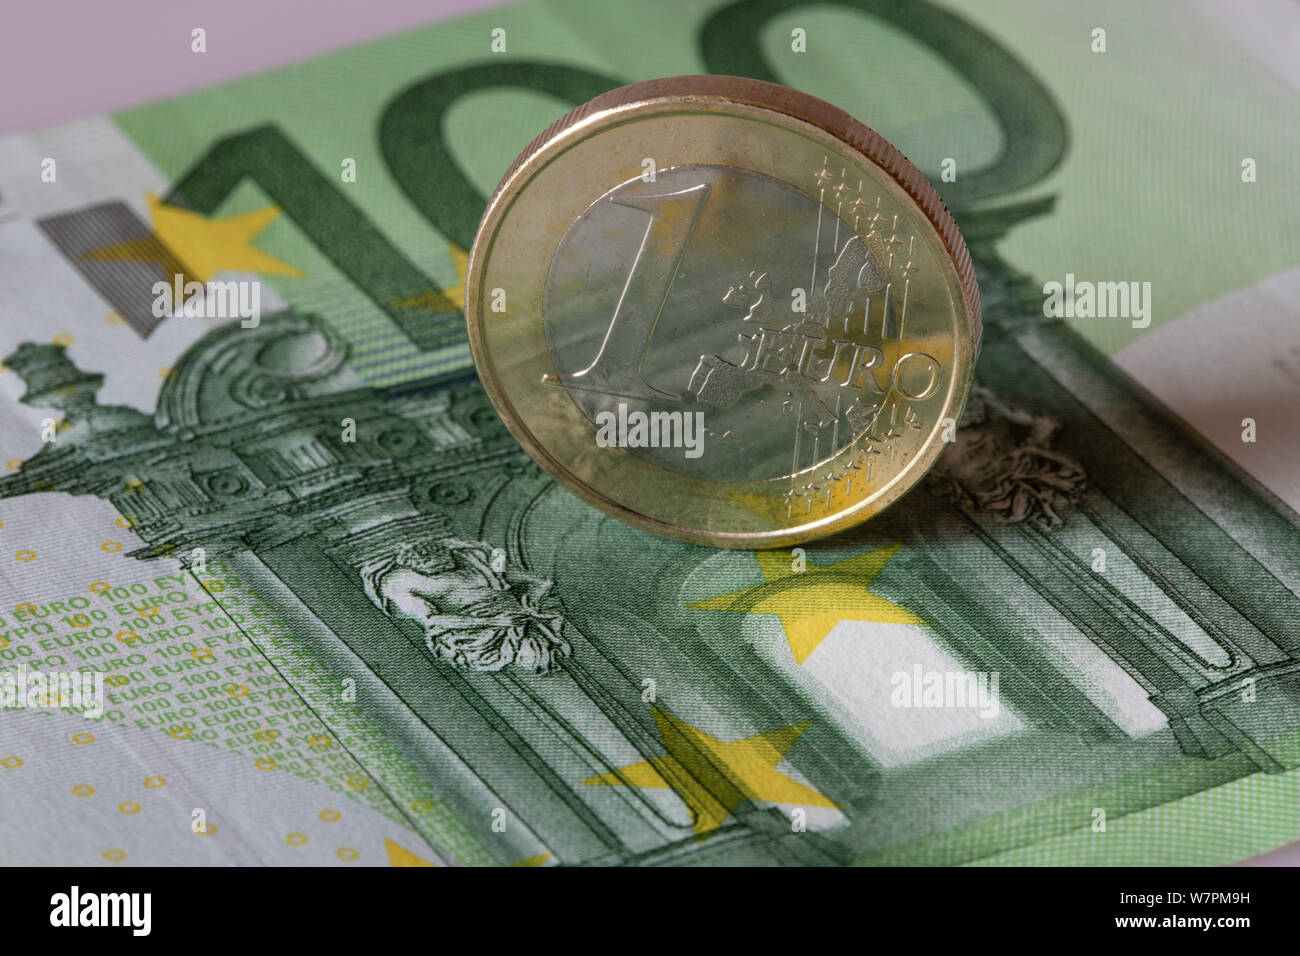 Cologne, Deutschland. 05th Aug, 2019. 100 Euro-Note and 1 Euro-Munze | usage worldwide Credit: dpa/Alamy Live News Stock Photo